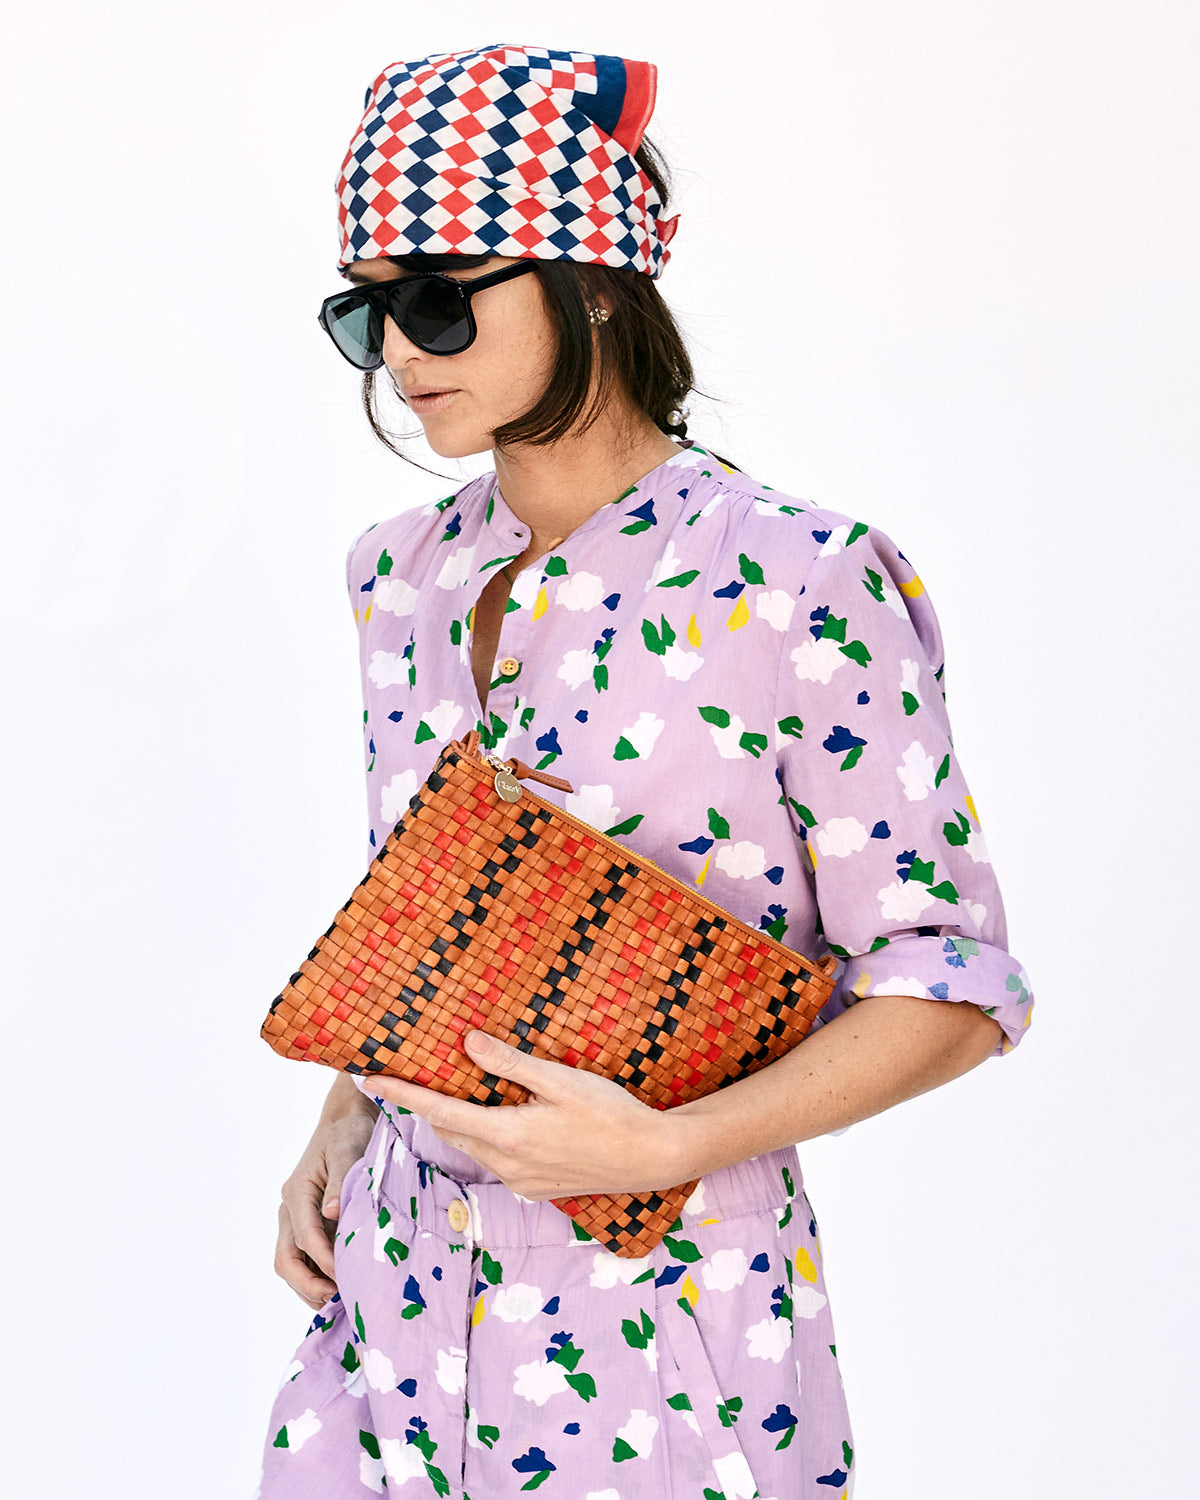 Danica, in the Lavender St. Martin Top Holding the Natural with Navy & Red Pinstripe Woven Checker Flat Clutch w/ Tabs